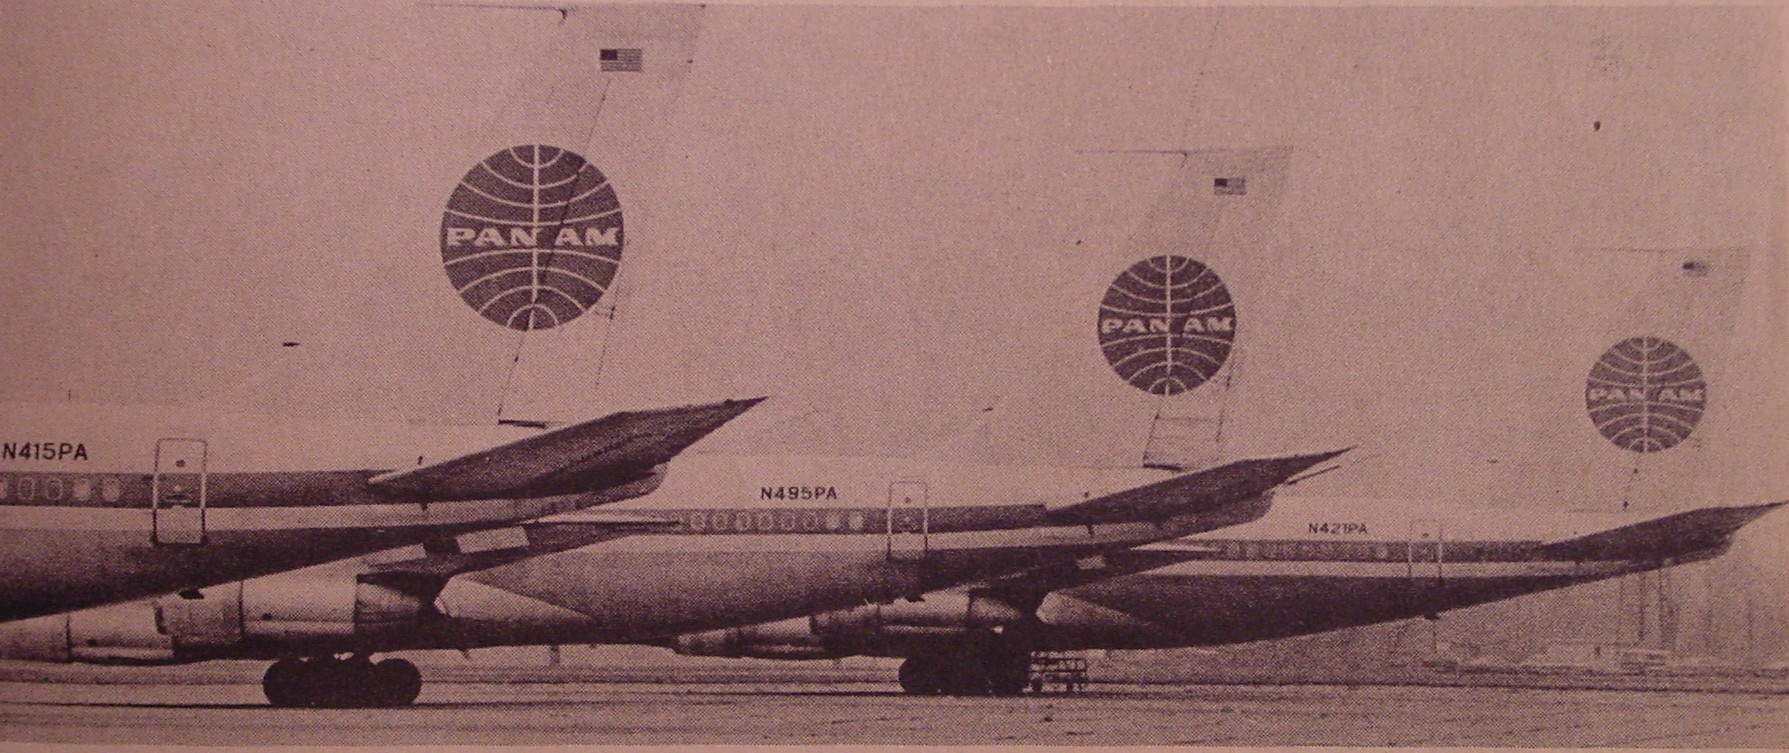 Three Pan Am 707 tails on the ramp in Detroit.